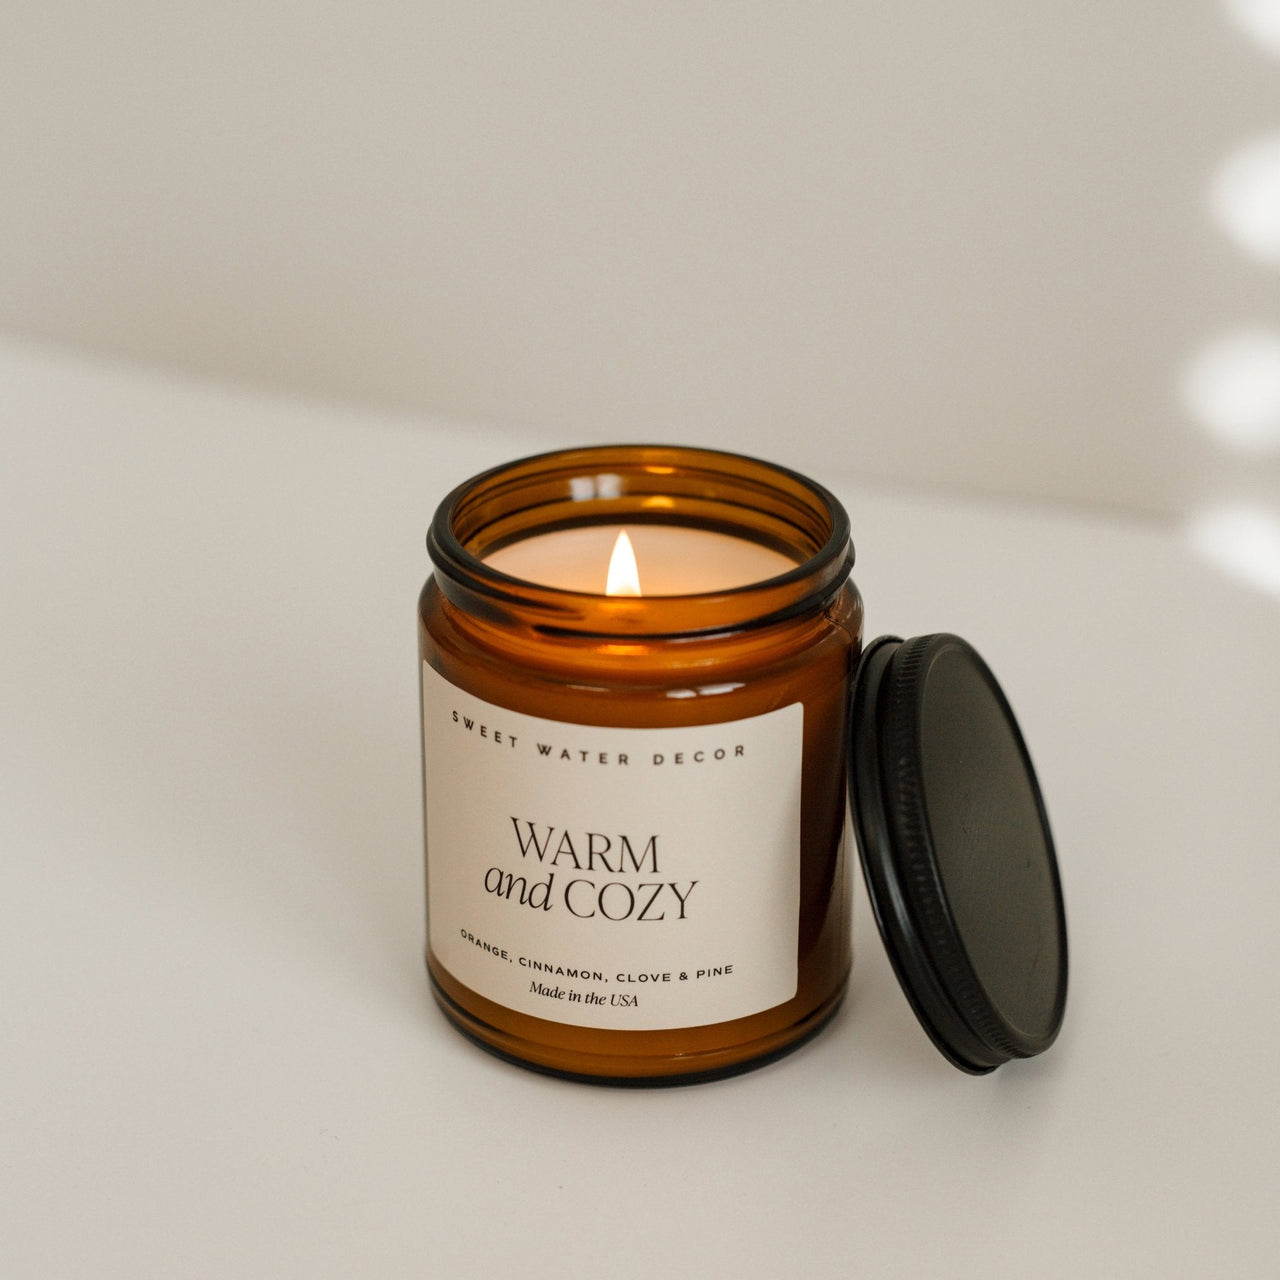 Warm and Cozy Soy Candle - Amber Jar - 9 oz - Tony's Home Furnishings